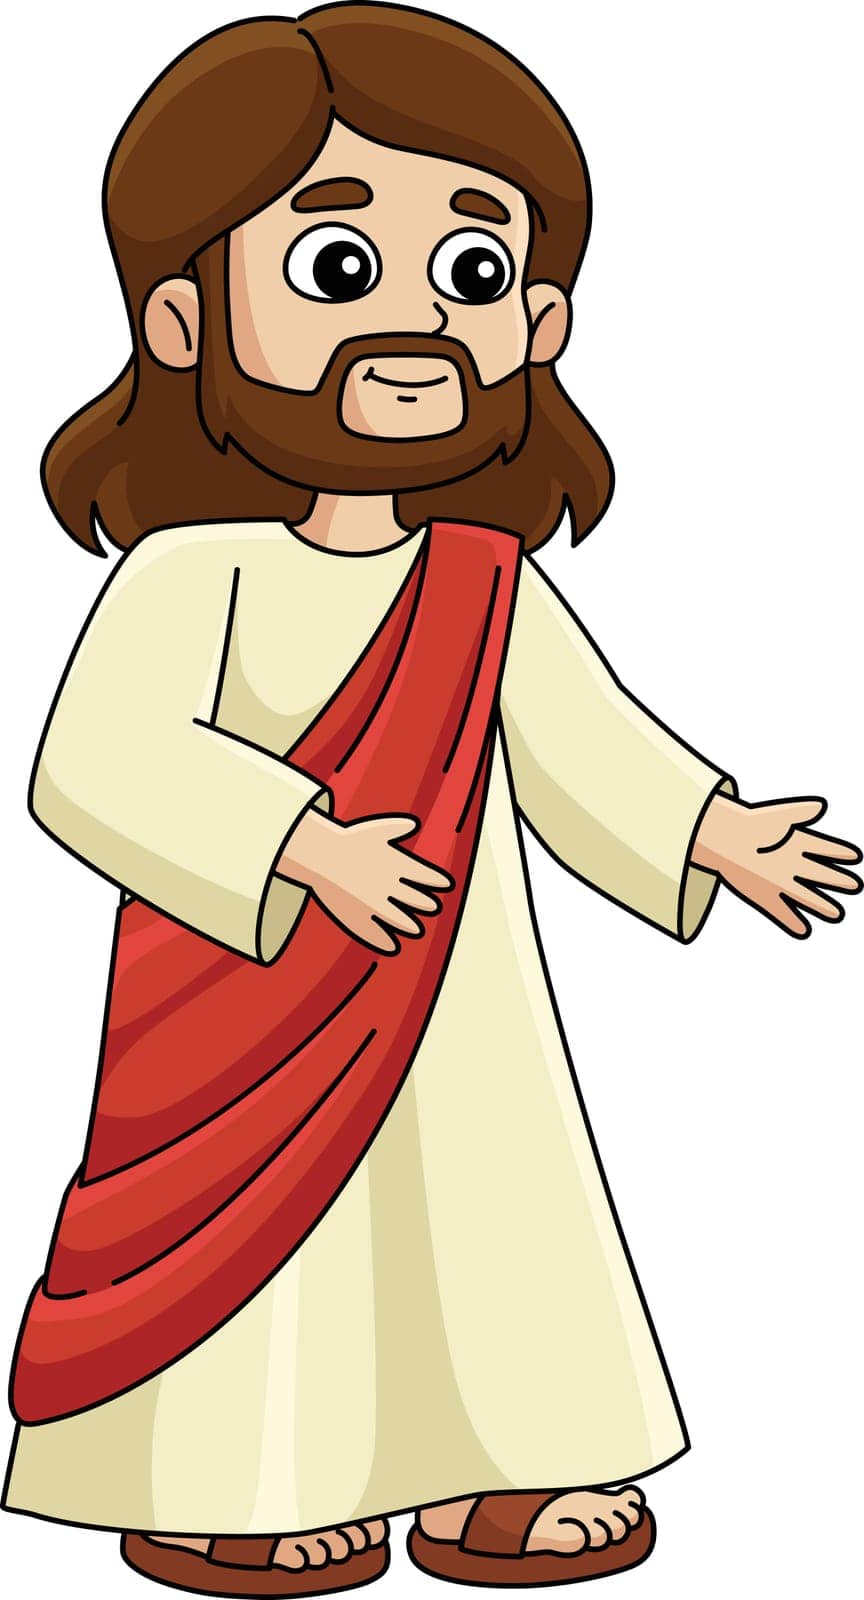 Jesus the Messiah Cartoon Colored Clipart by abbydesign